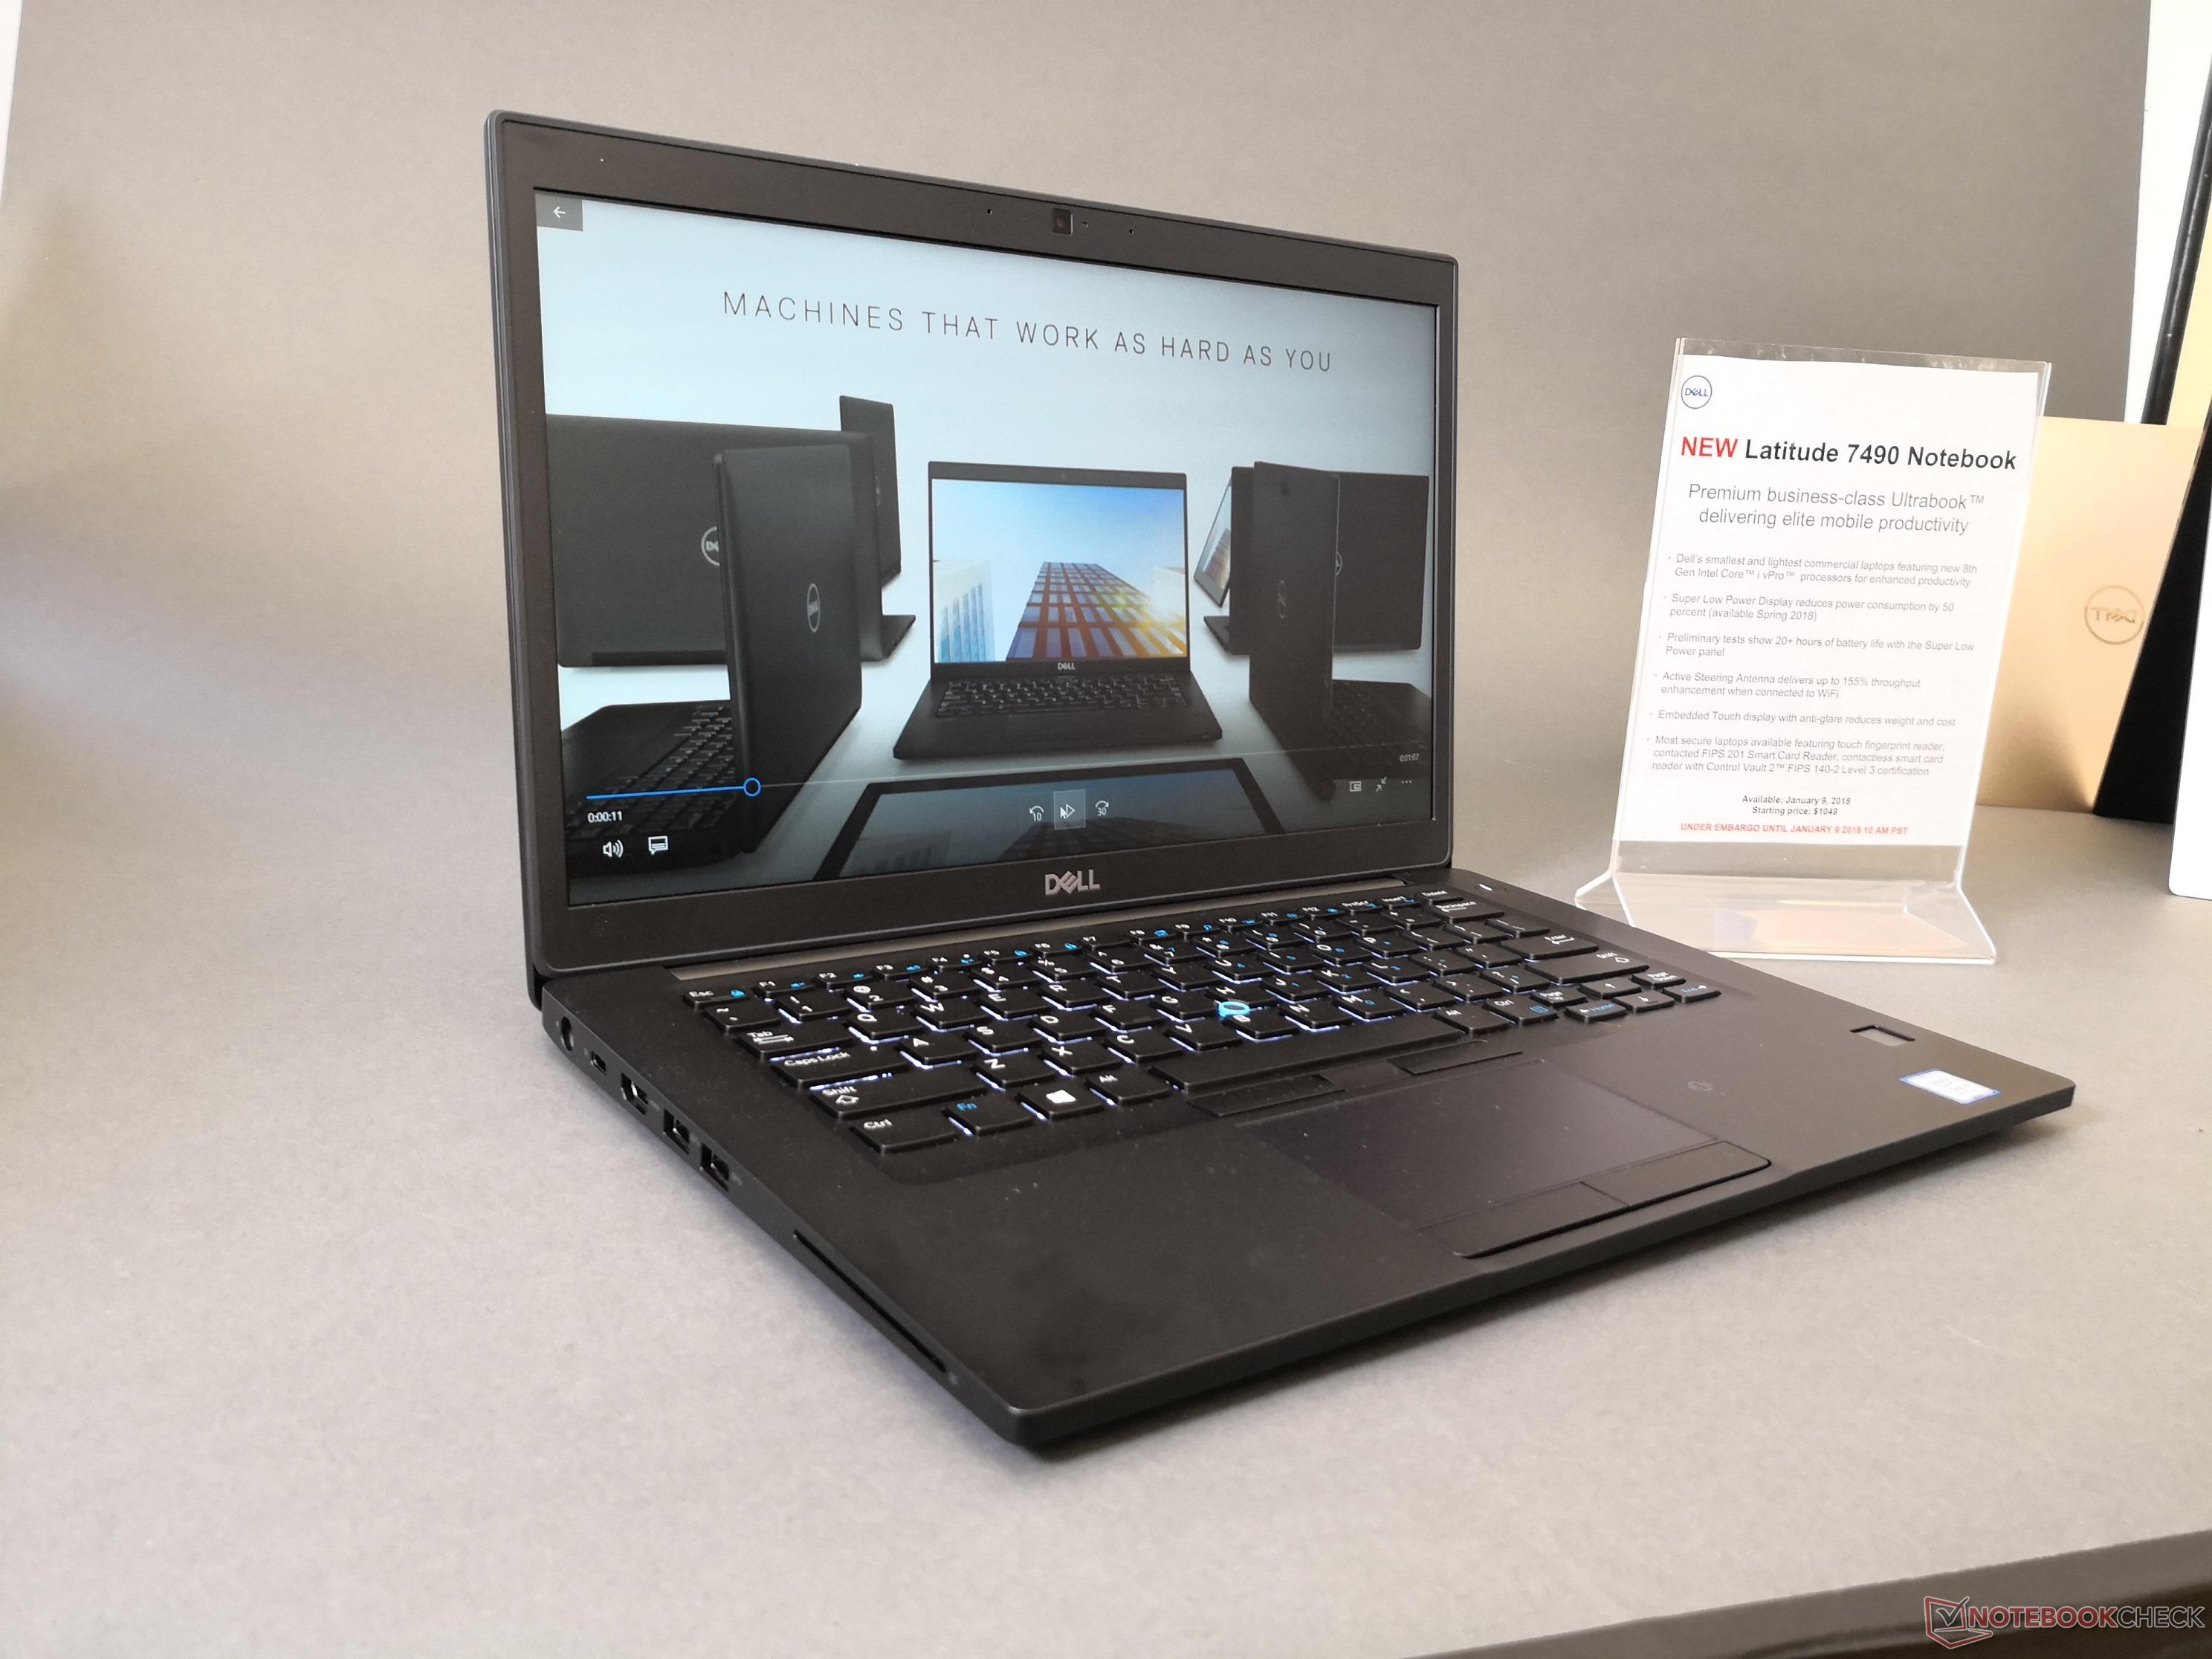 Dell Latitude 7490 coming with Active Steering WiFi and